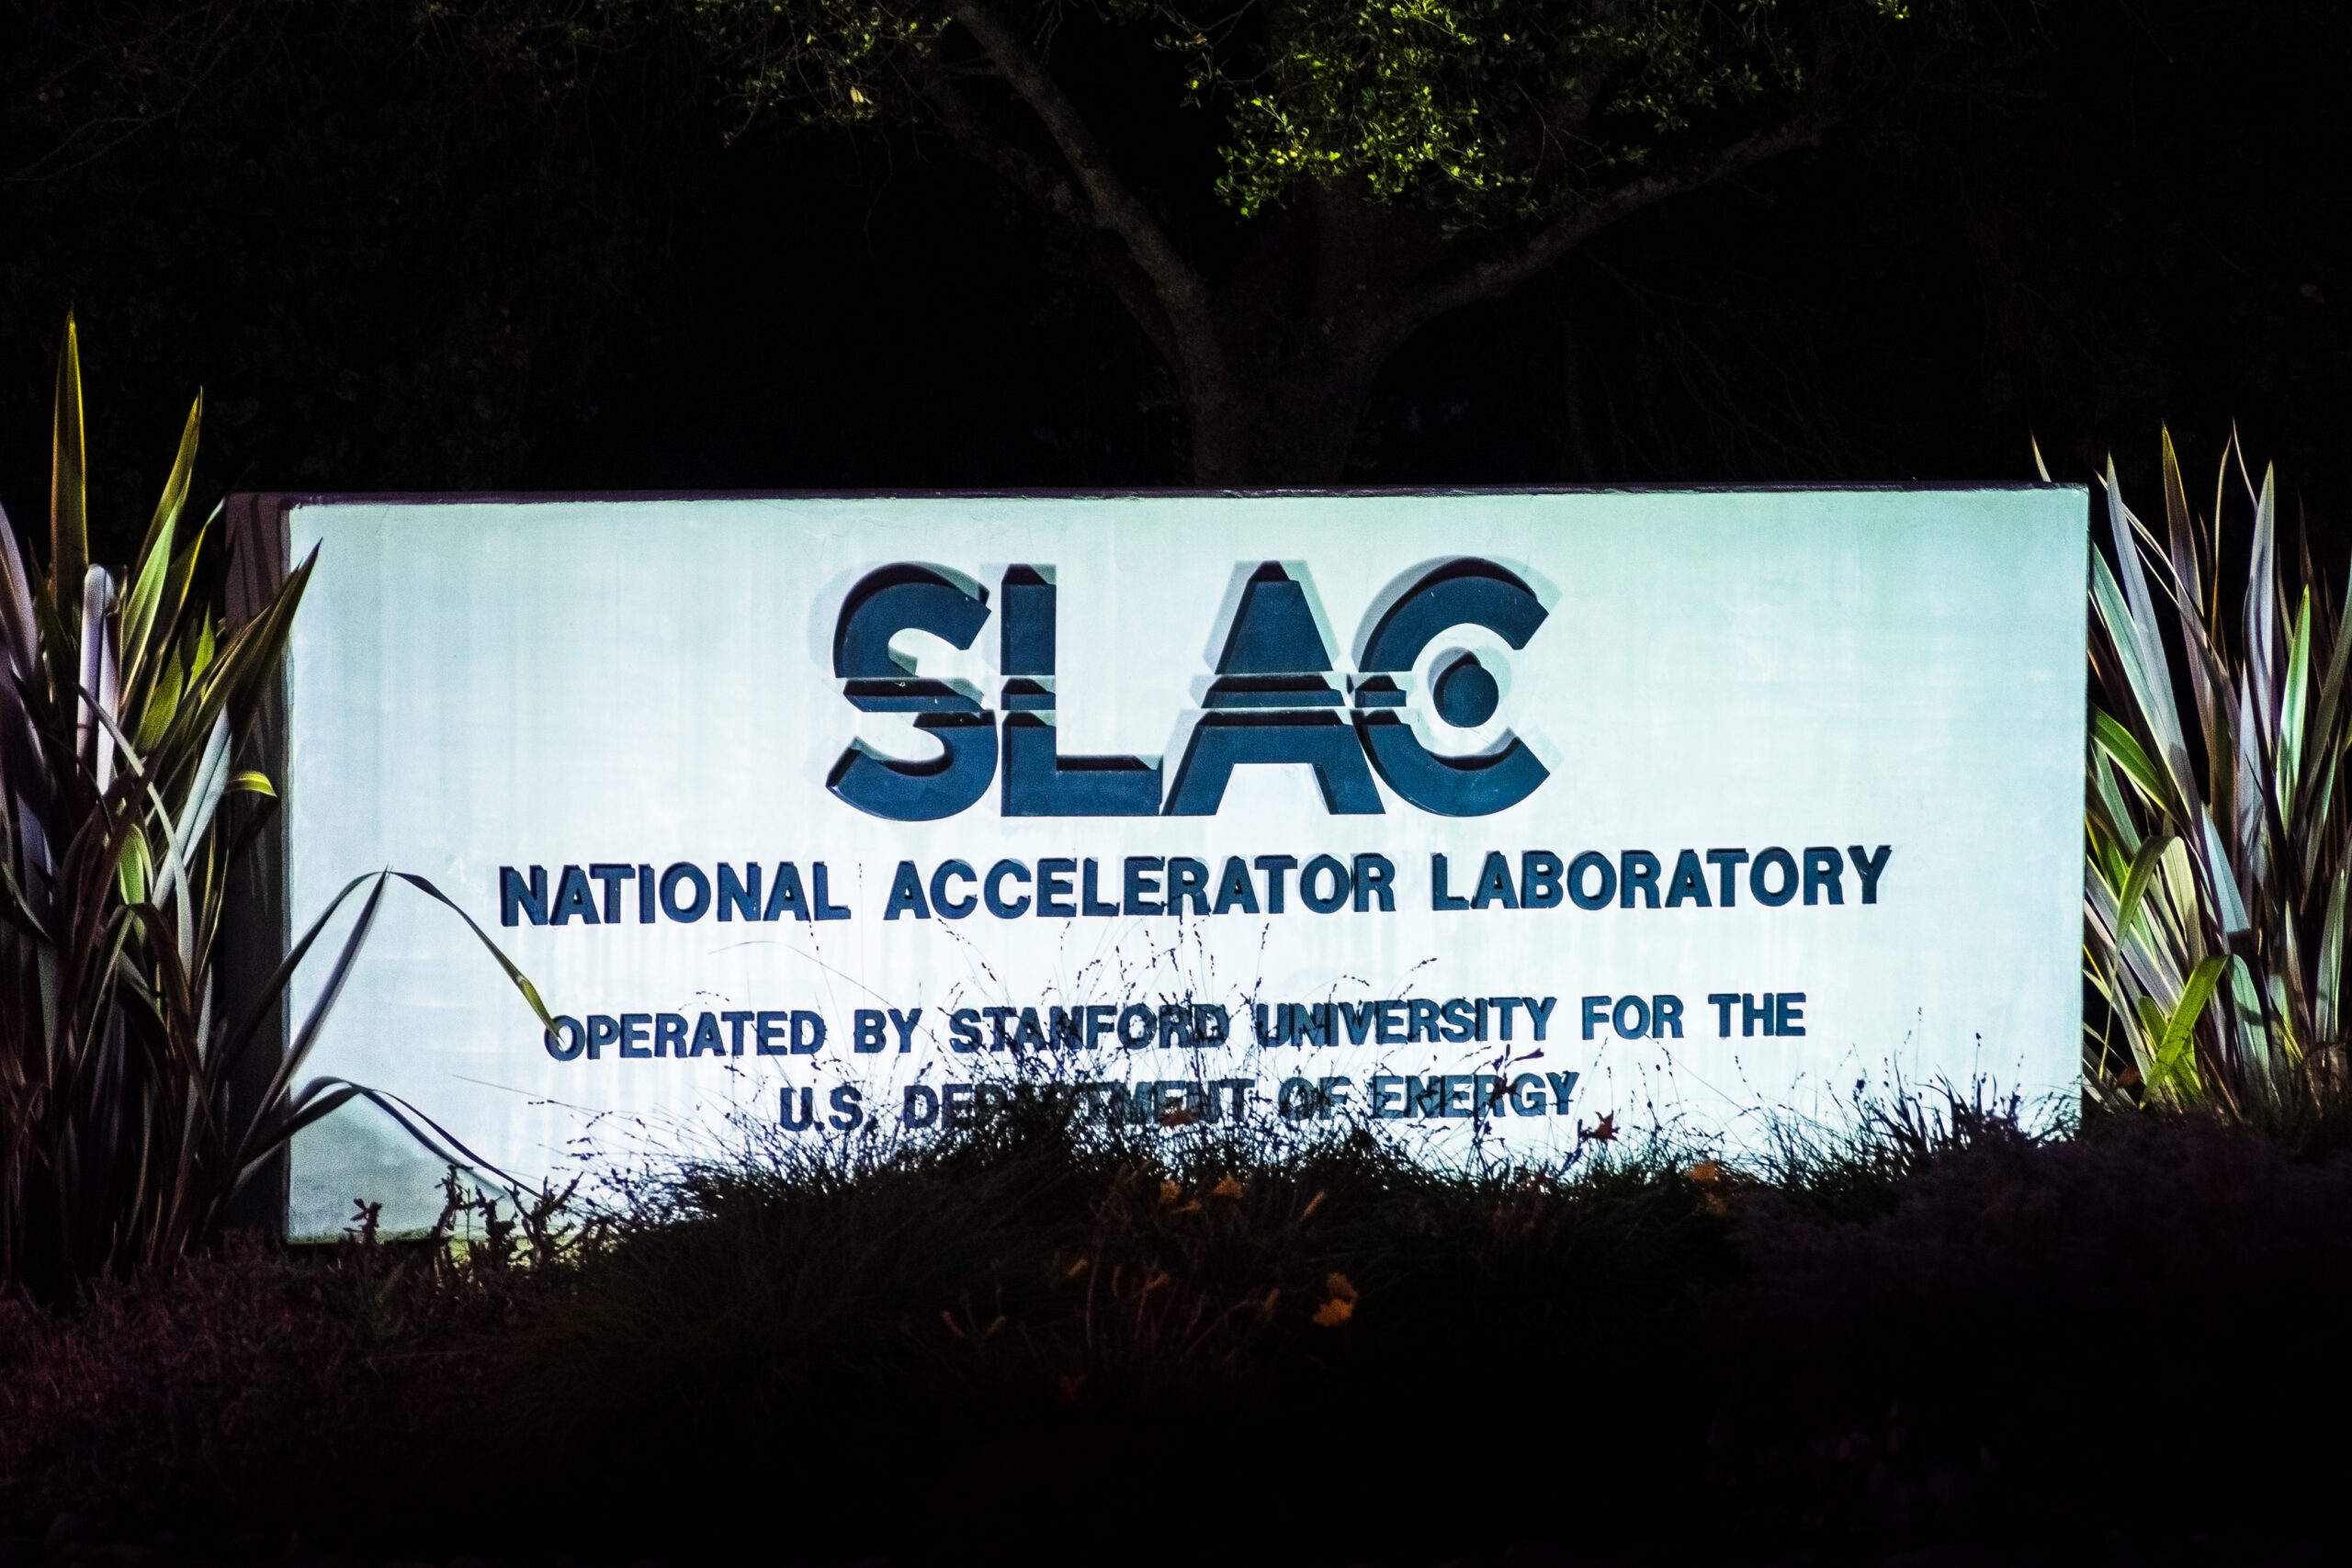 Electrical Mishap at High-Tech Stanford Lab Disfigures Worker, Launches Federal Probe